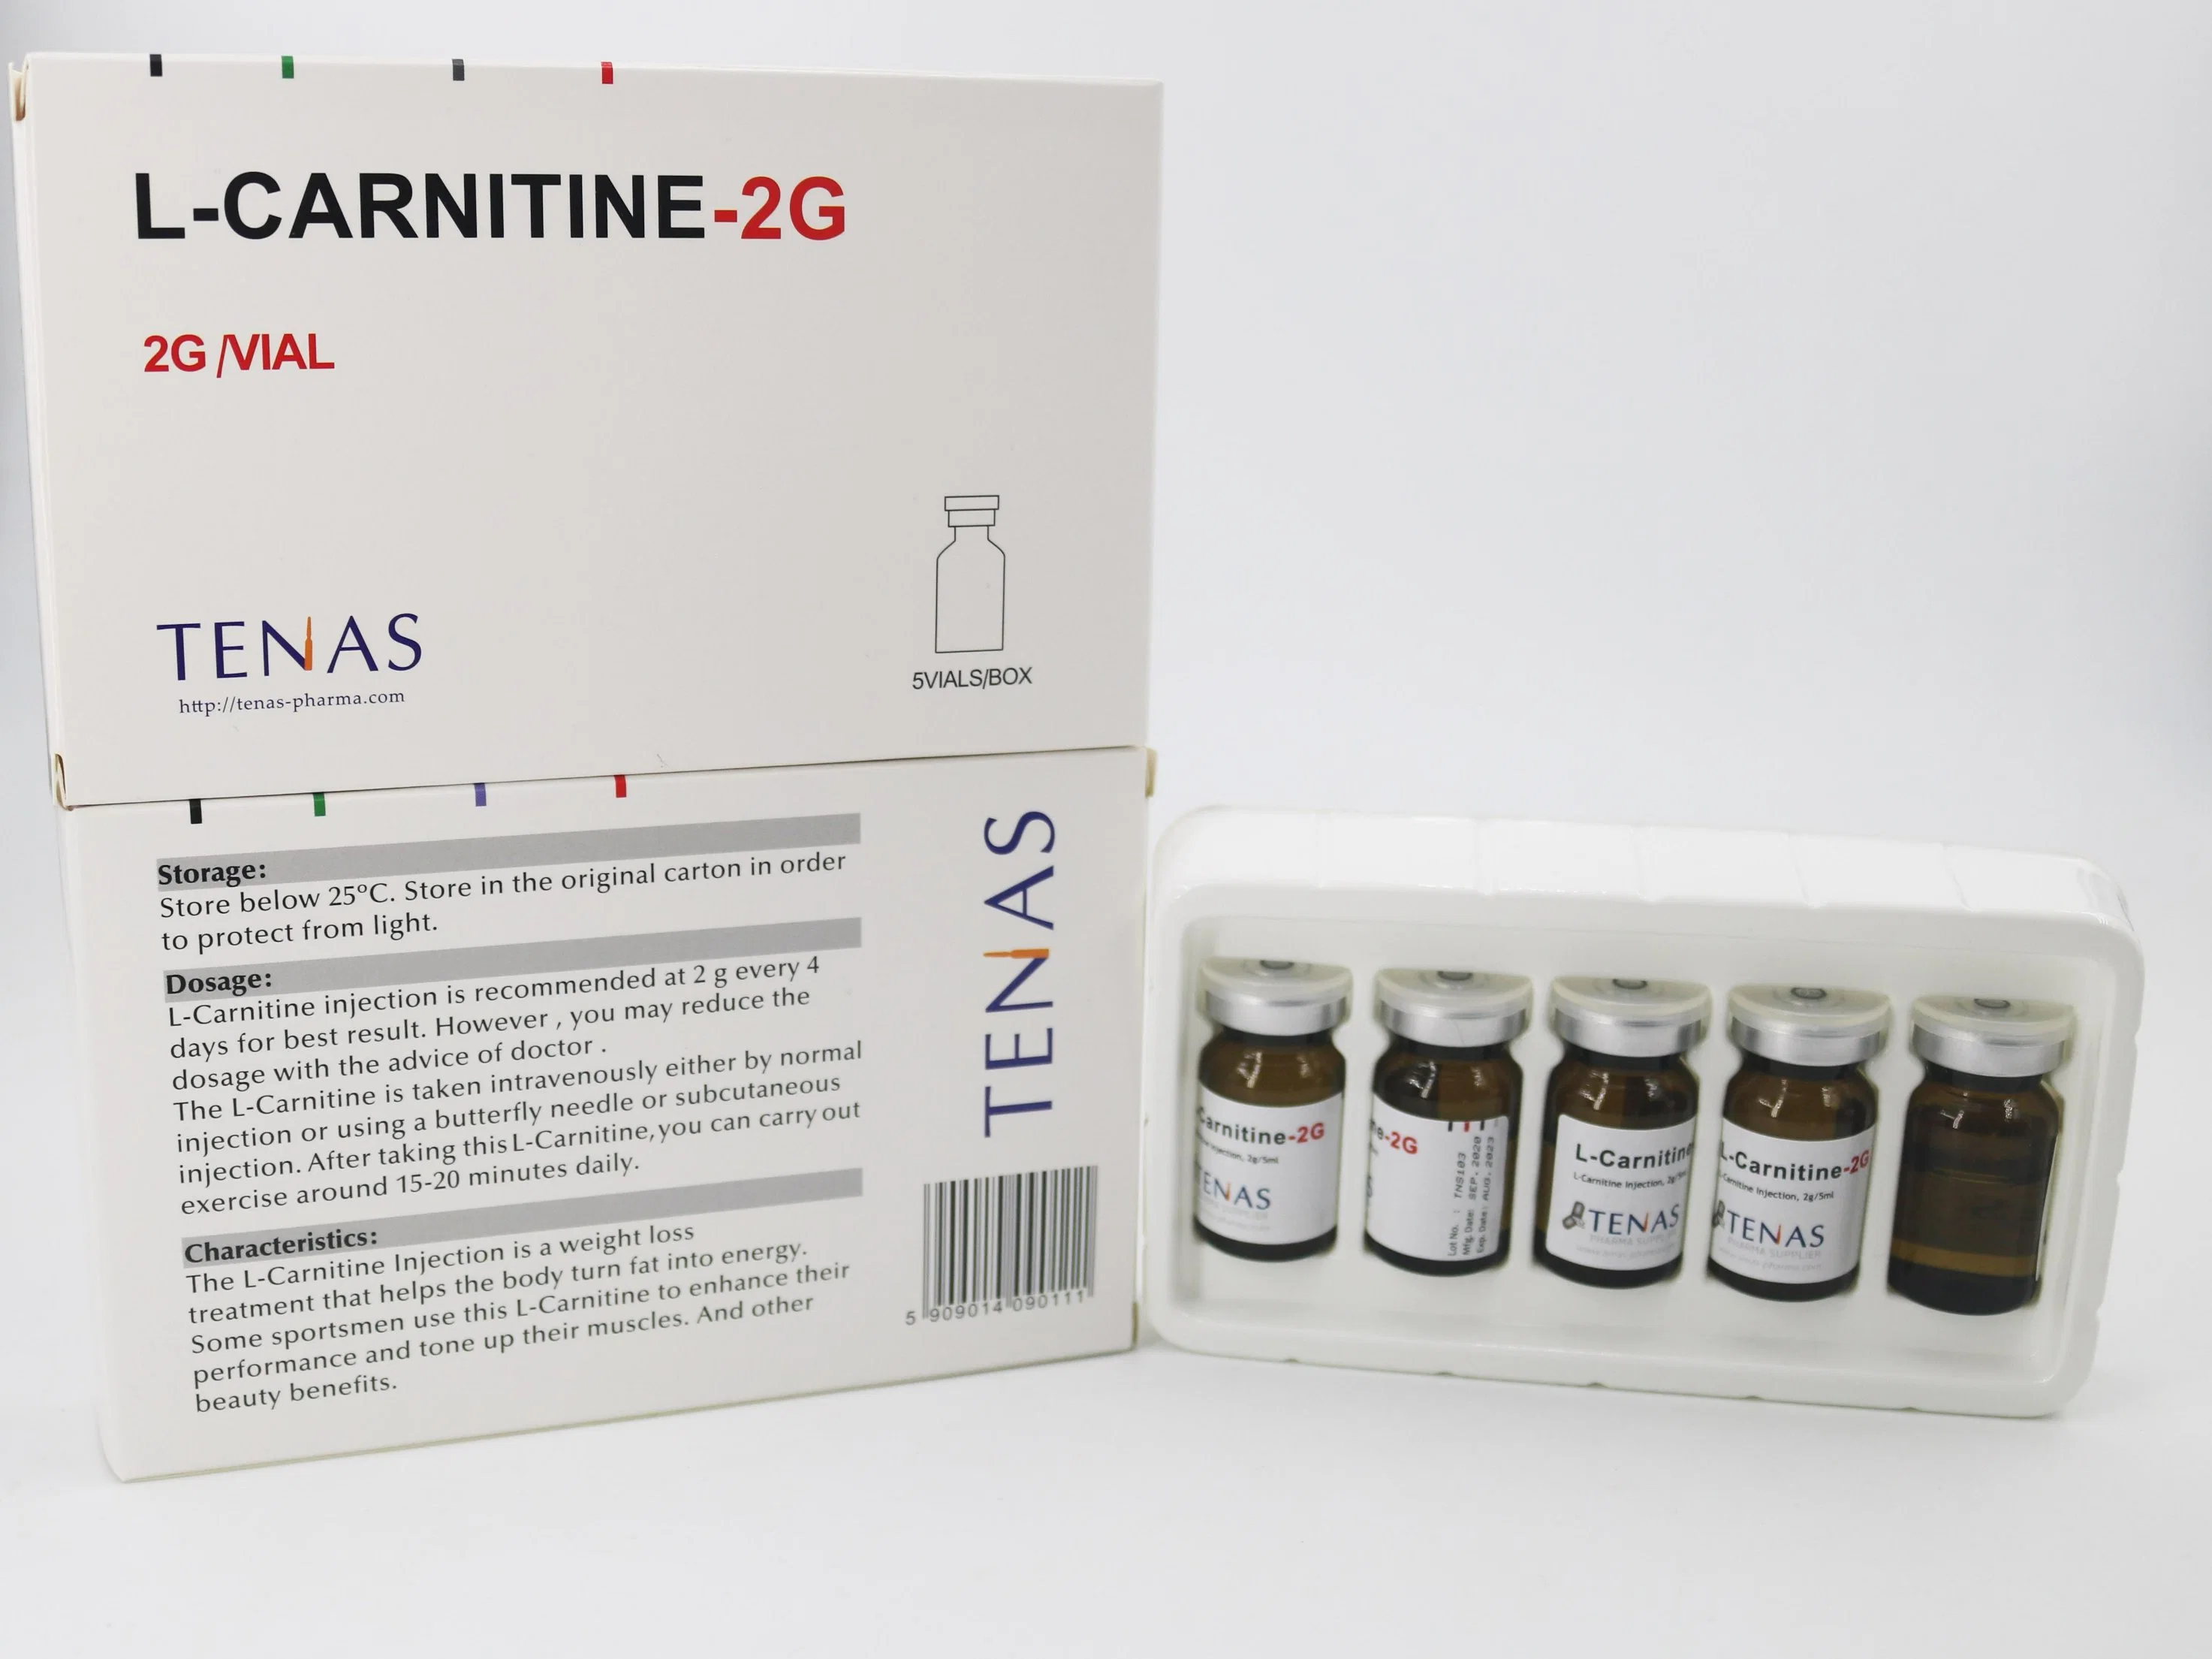 Lossing Weight Product with Best Price L-Carnitine Injection for Slimming